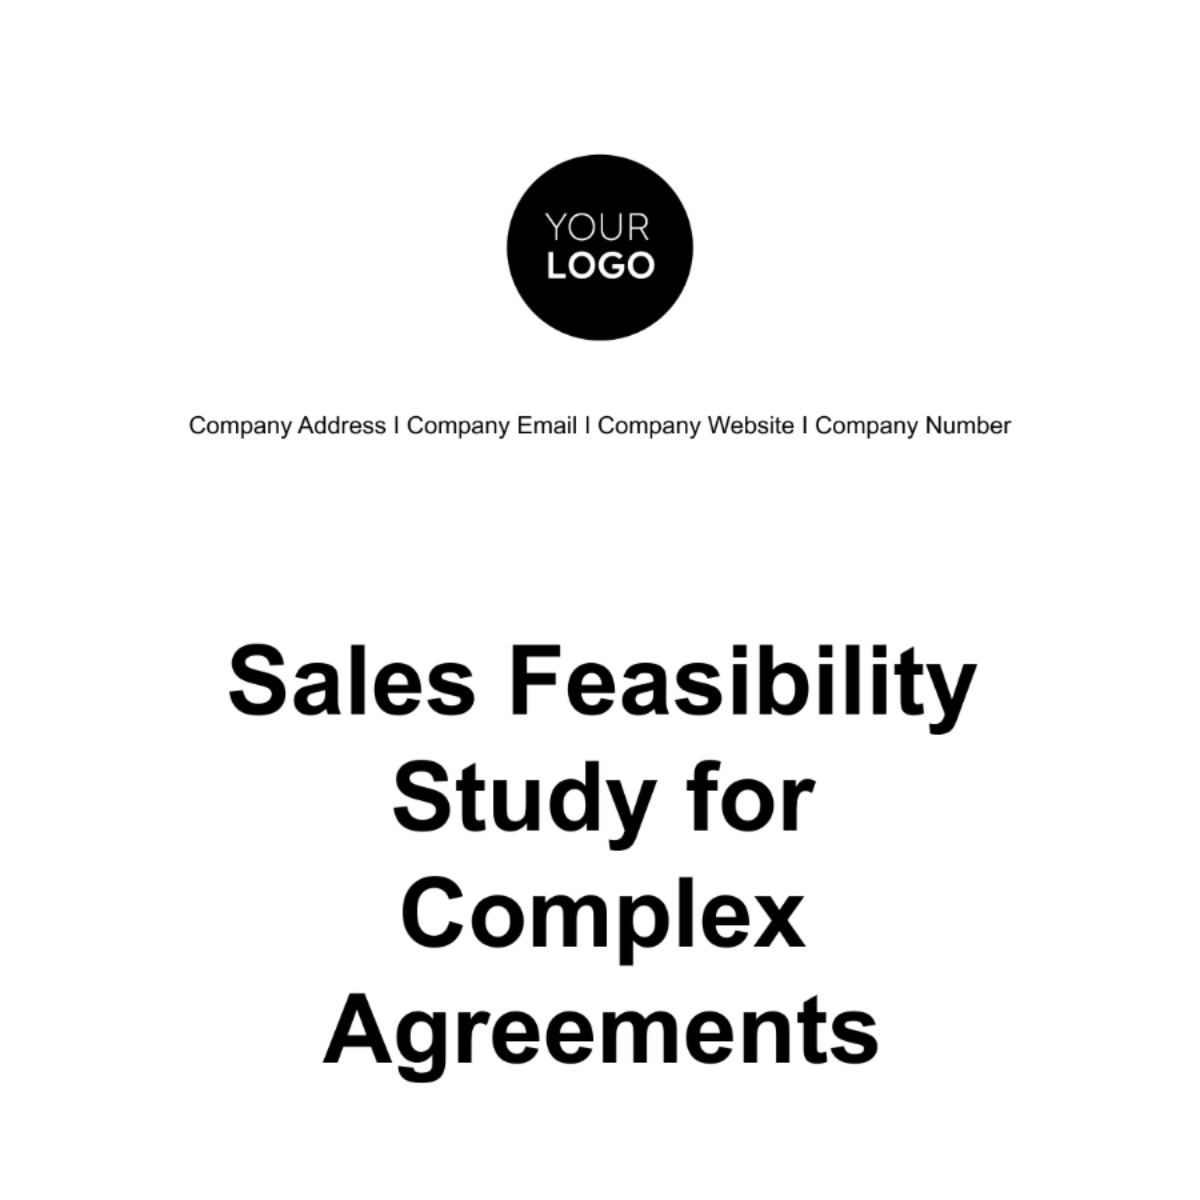 Sales Feasibility Study for Complex Agreements Template